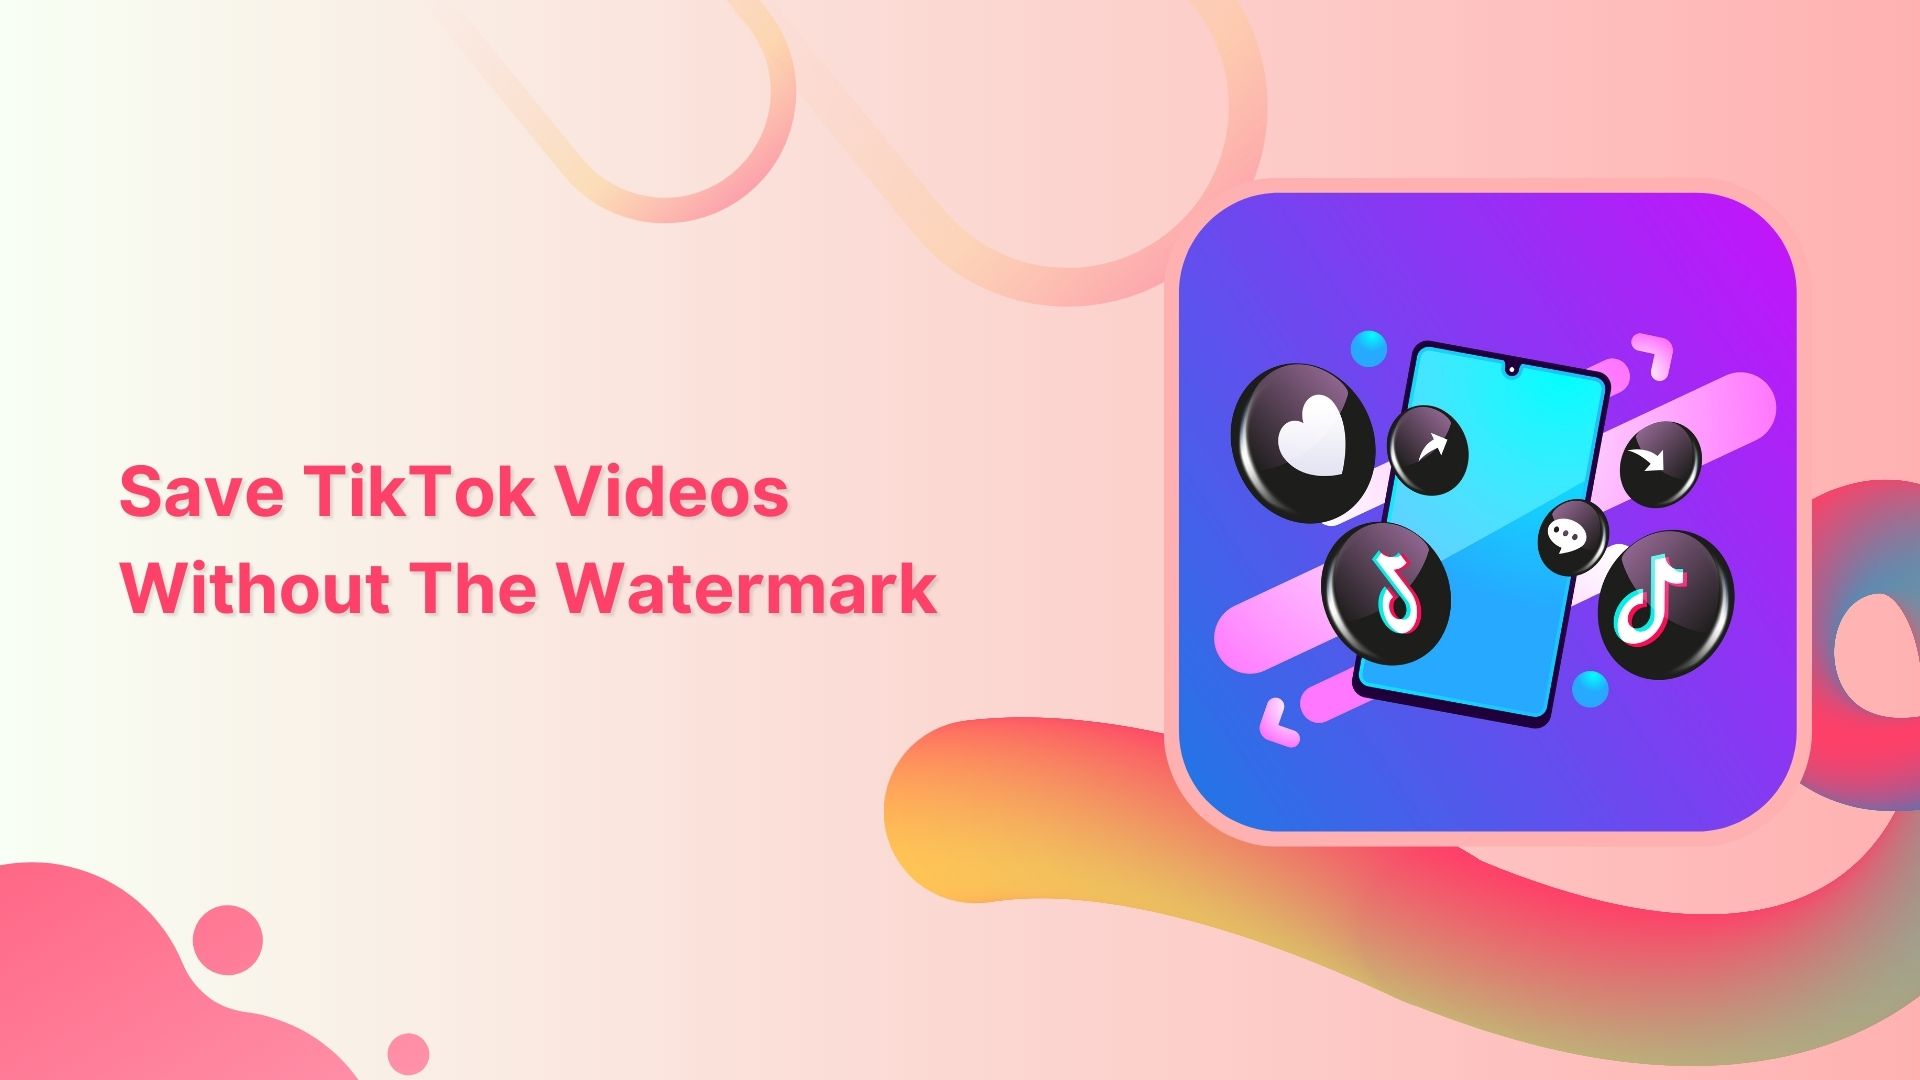 How To Save TikTok Videos Without The Watermark?